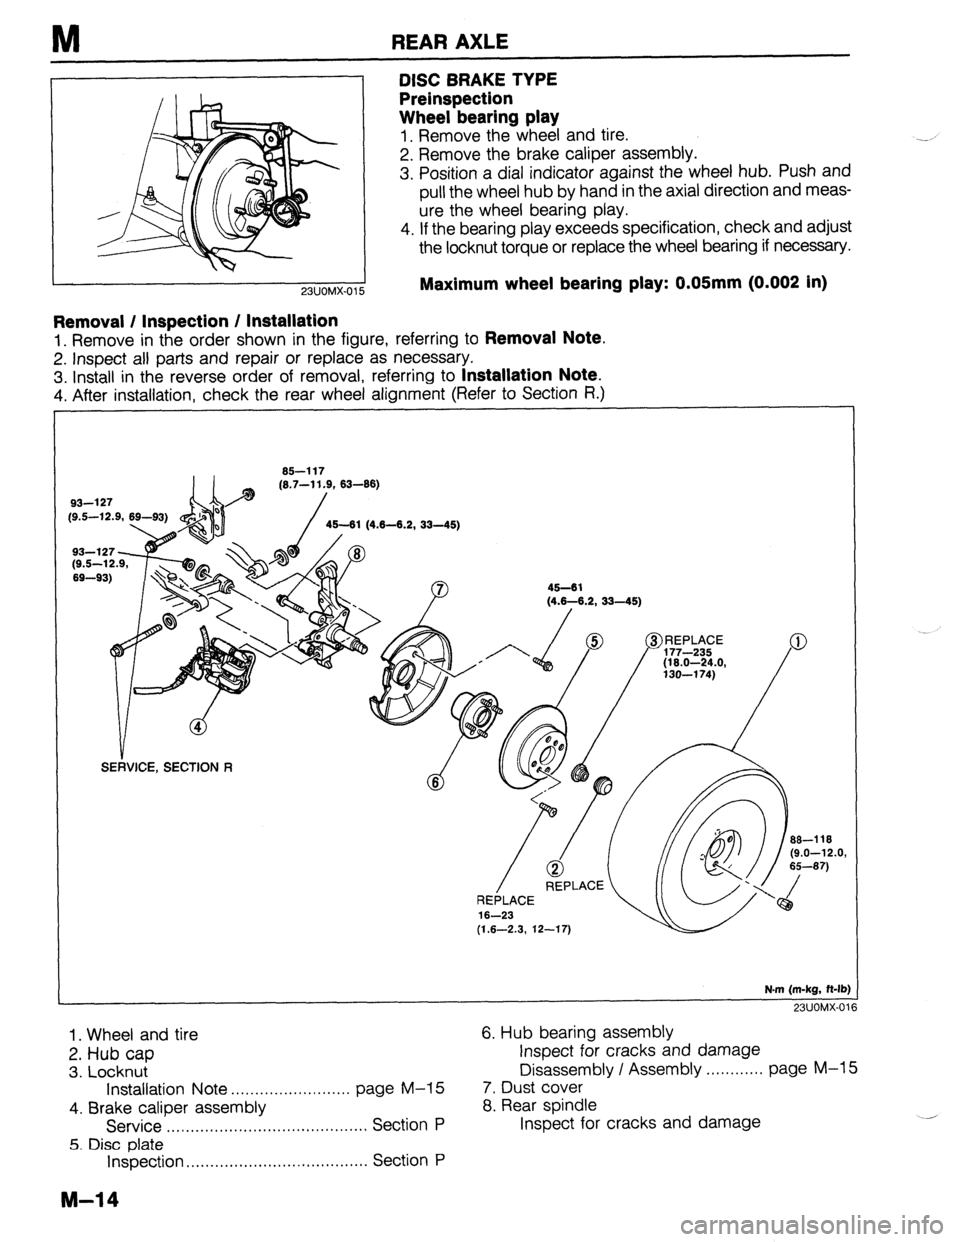 MAZDA 323 1989  Factory Repair Manual M REAR AXLE 
DISC BRAKE TYPE 
Preinspection 
Wheel bearing play 
1. Remove the wheel and tire. 
2. Remove the brake caliper assembly. 
3. Position a dial indicator against the wheel hub. Push and 
pul